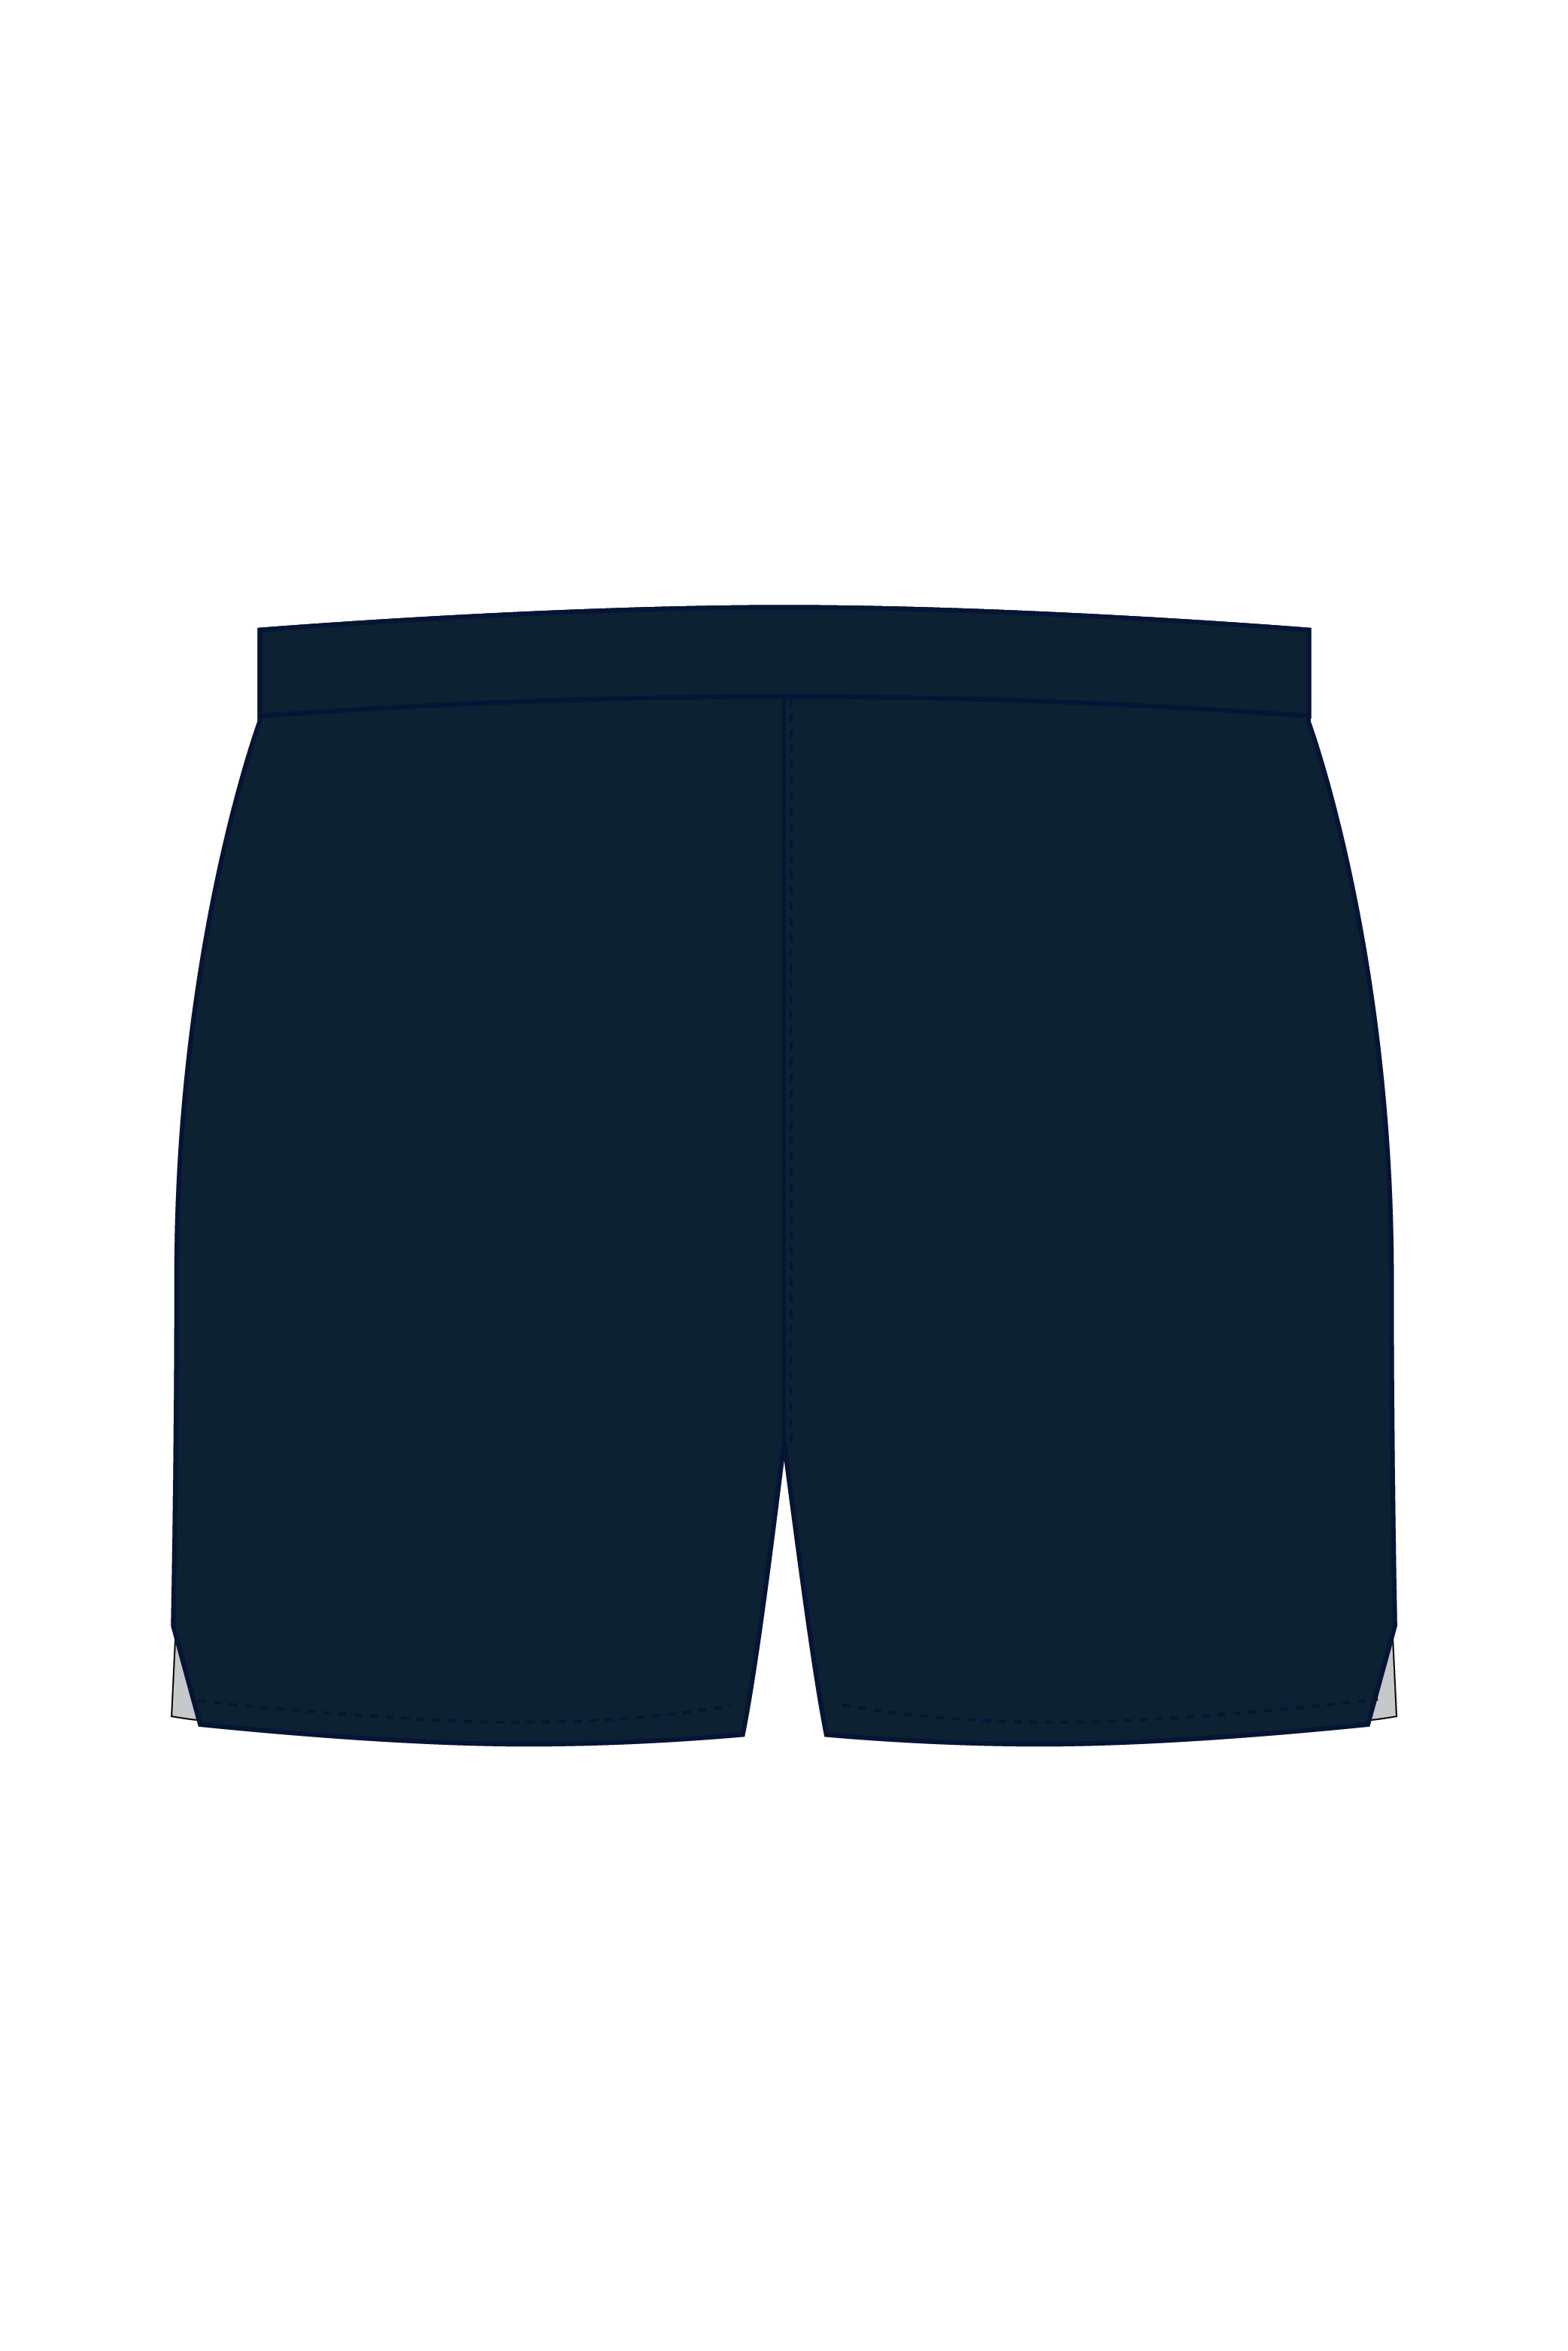 Manly Swimming Club Kid's Shorts